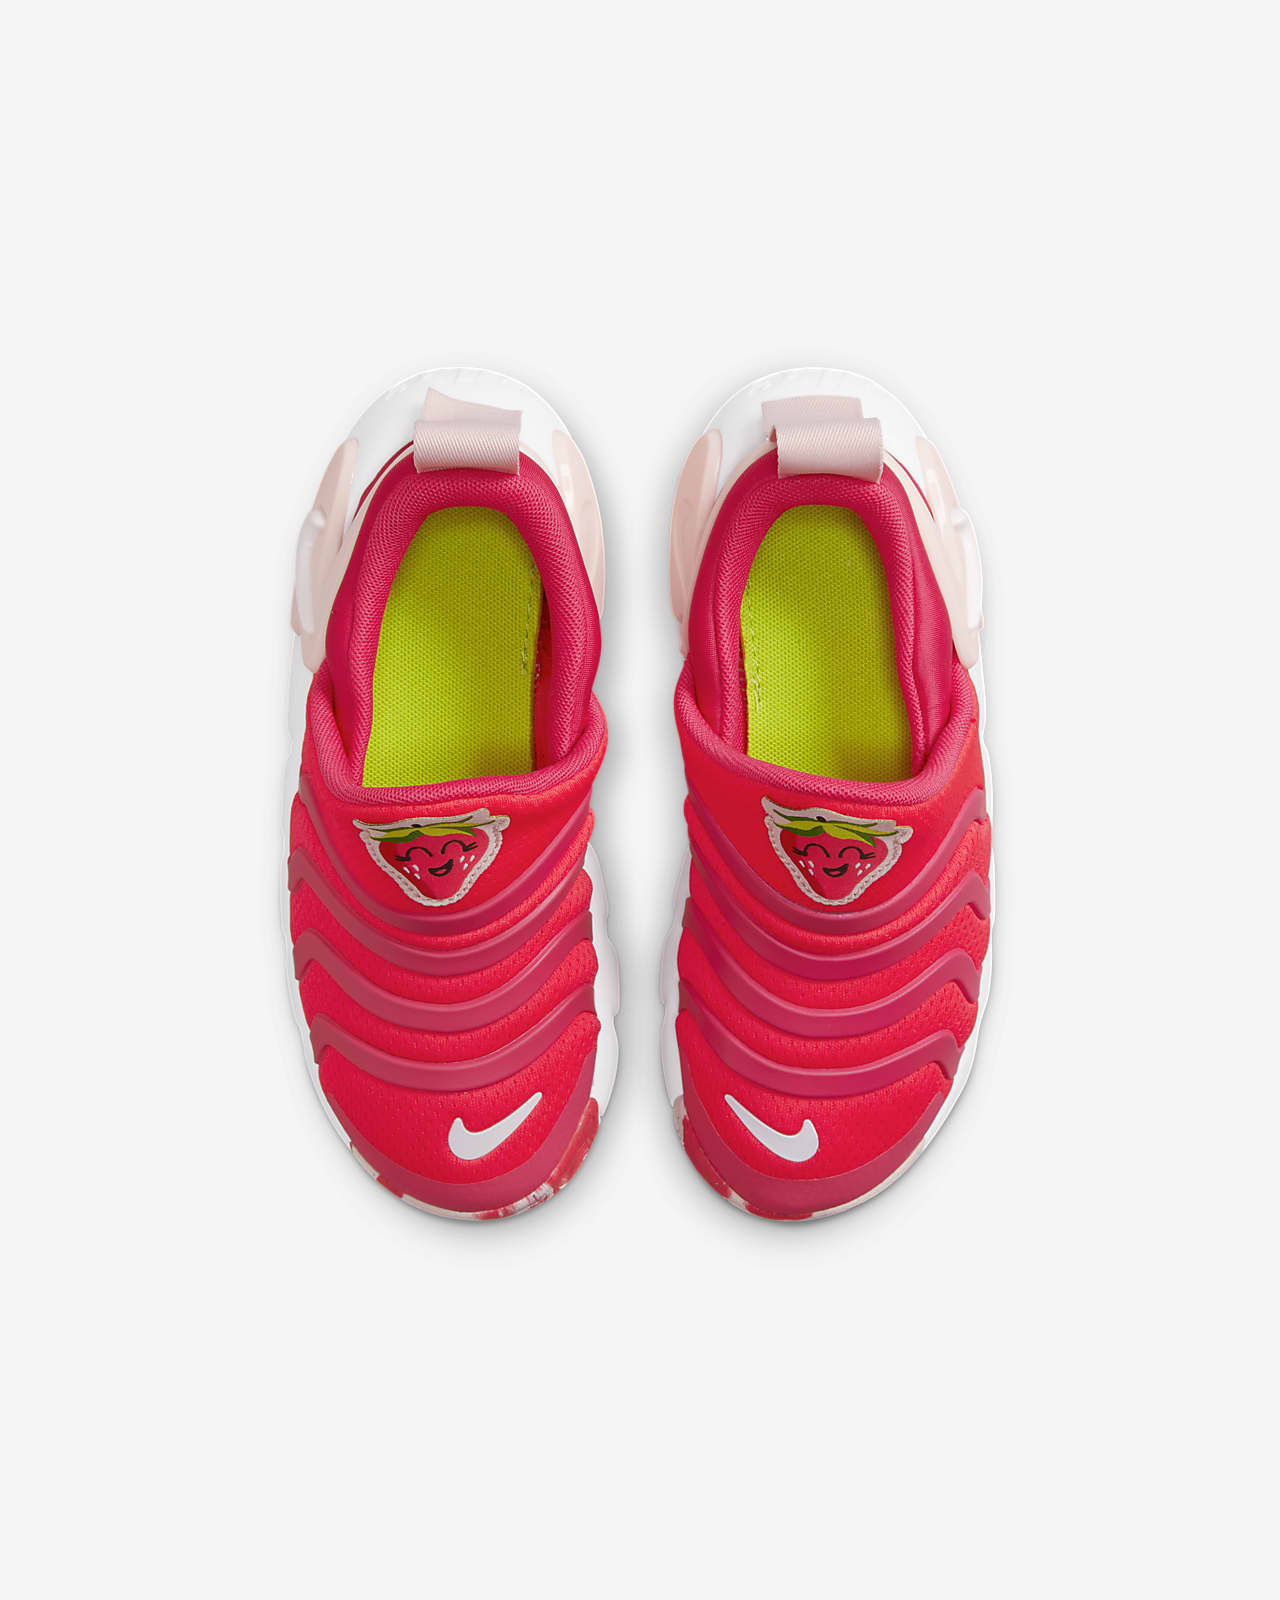 Arbitrage Decision scratch Nike Dynamo Go Lil Fruits Younger Kids' Easy On/Off Shoes. Nike SA